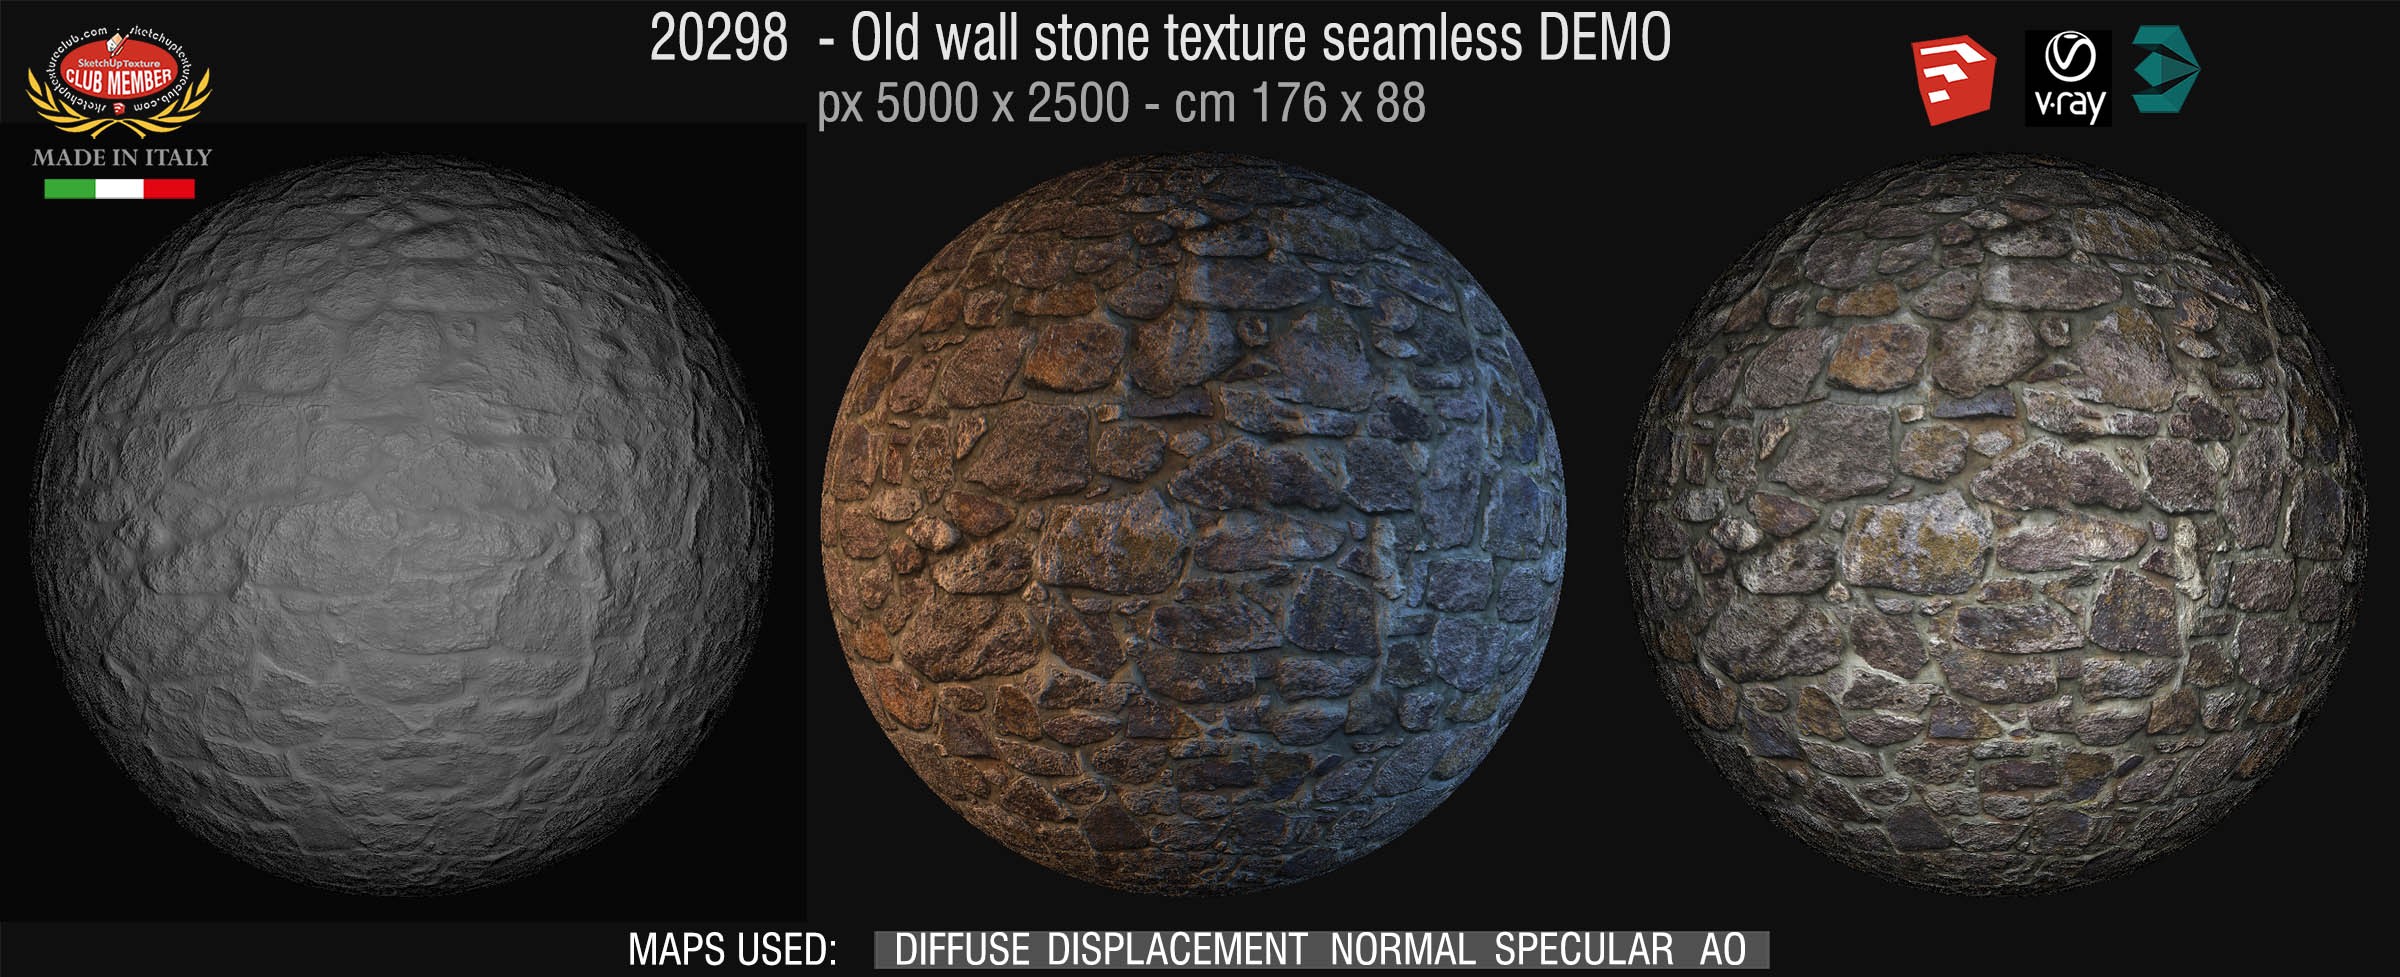 20298 HR Old wall stone texture seamless + maps DEMO